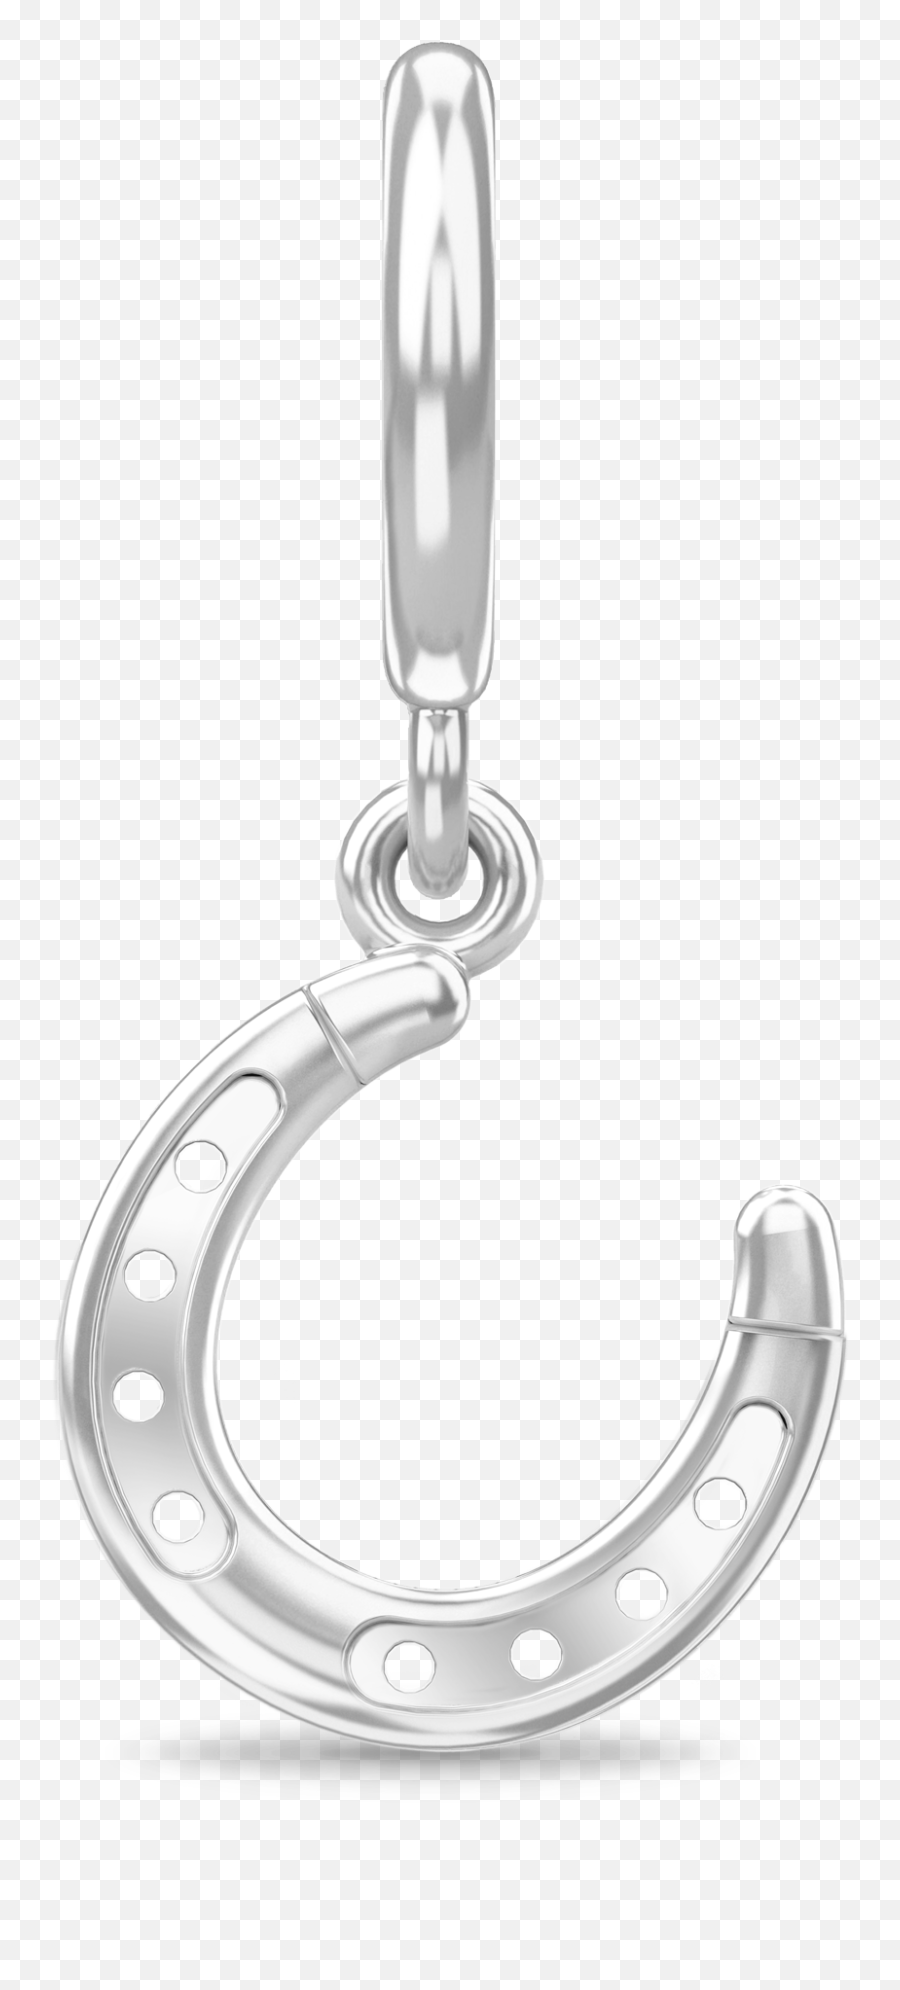 Horseshoe Clipart Png Full Size Png Download Seekpng - Horseshoe Emoji,Horseshoe Clipart